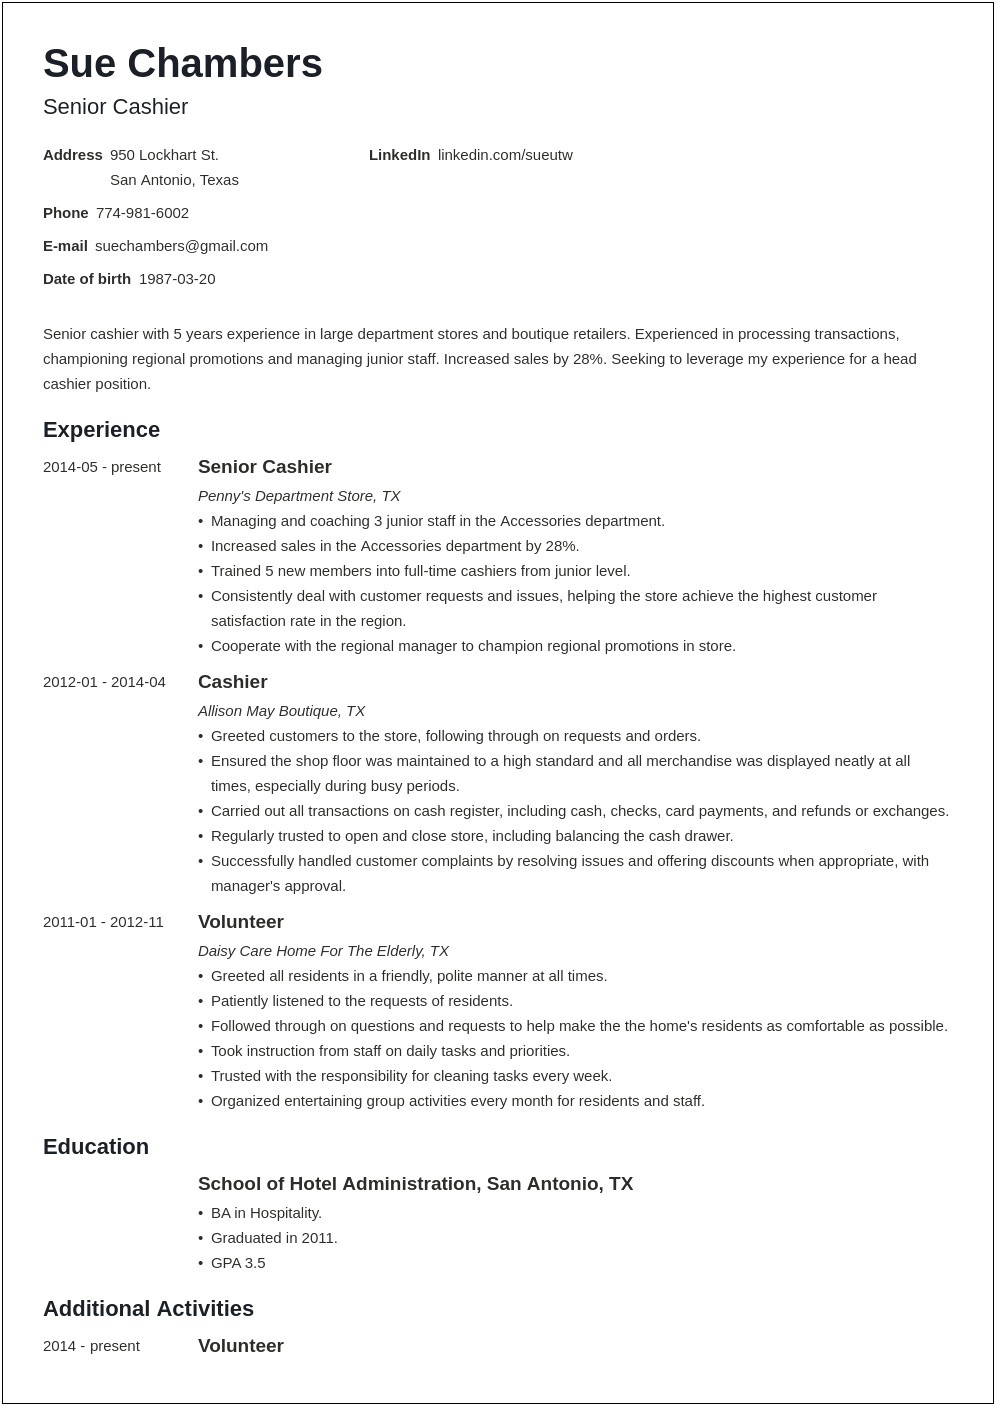 Resume Objective For Grocery Store Clerk